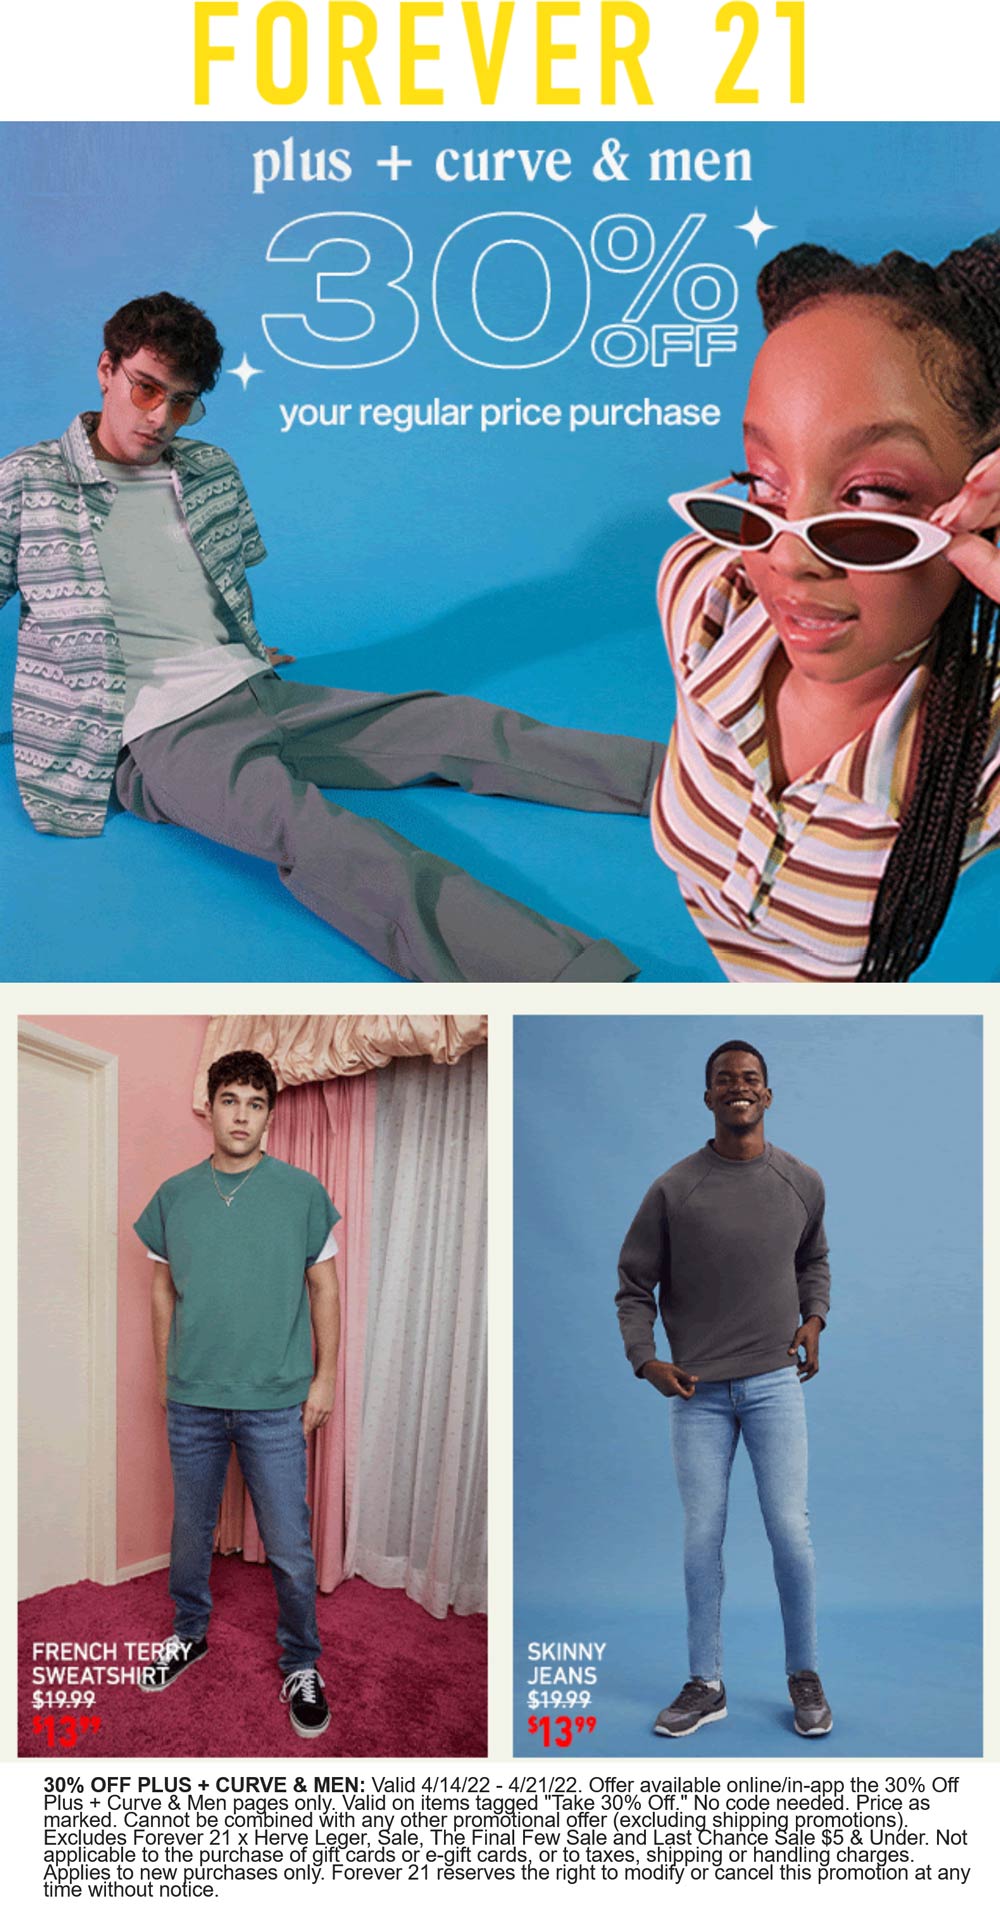 Forever 21 stores Coupon  30% off men & plus sizes online at Forever 21 #forever21 